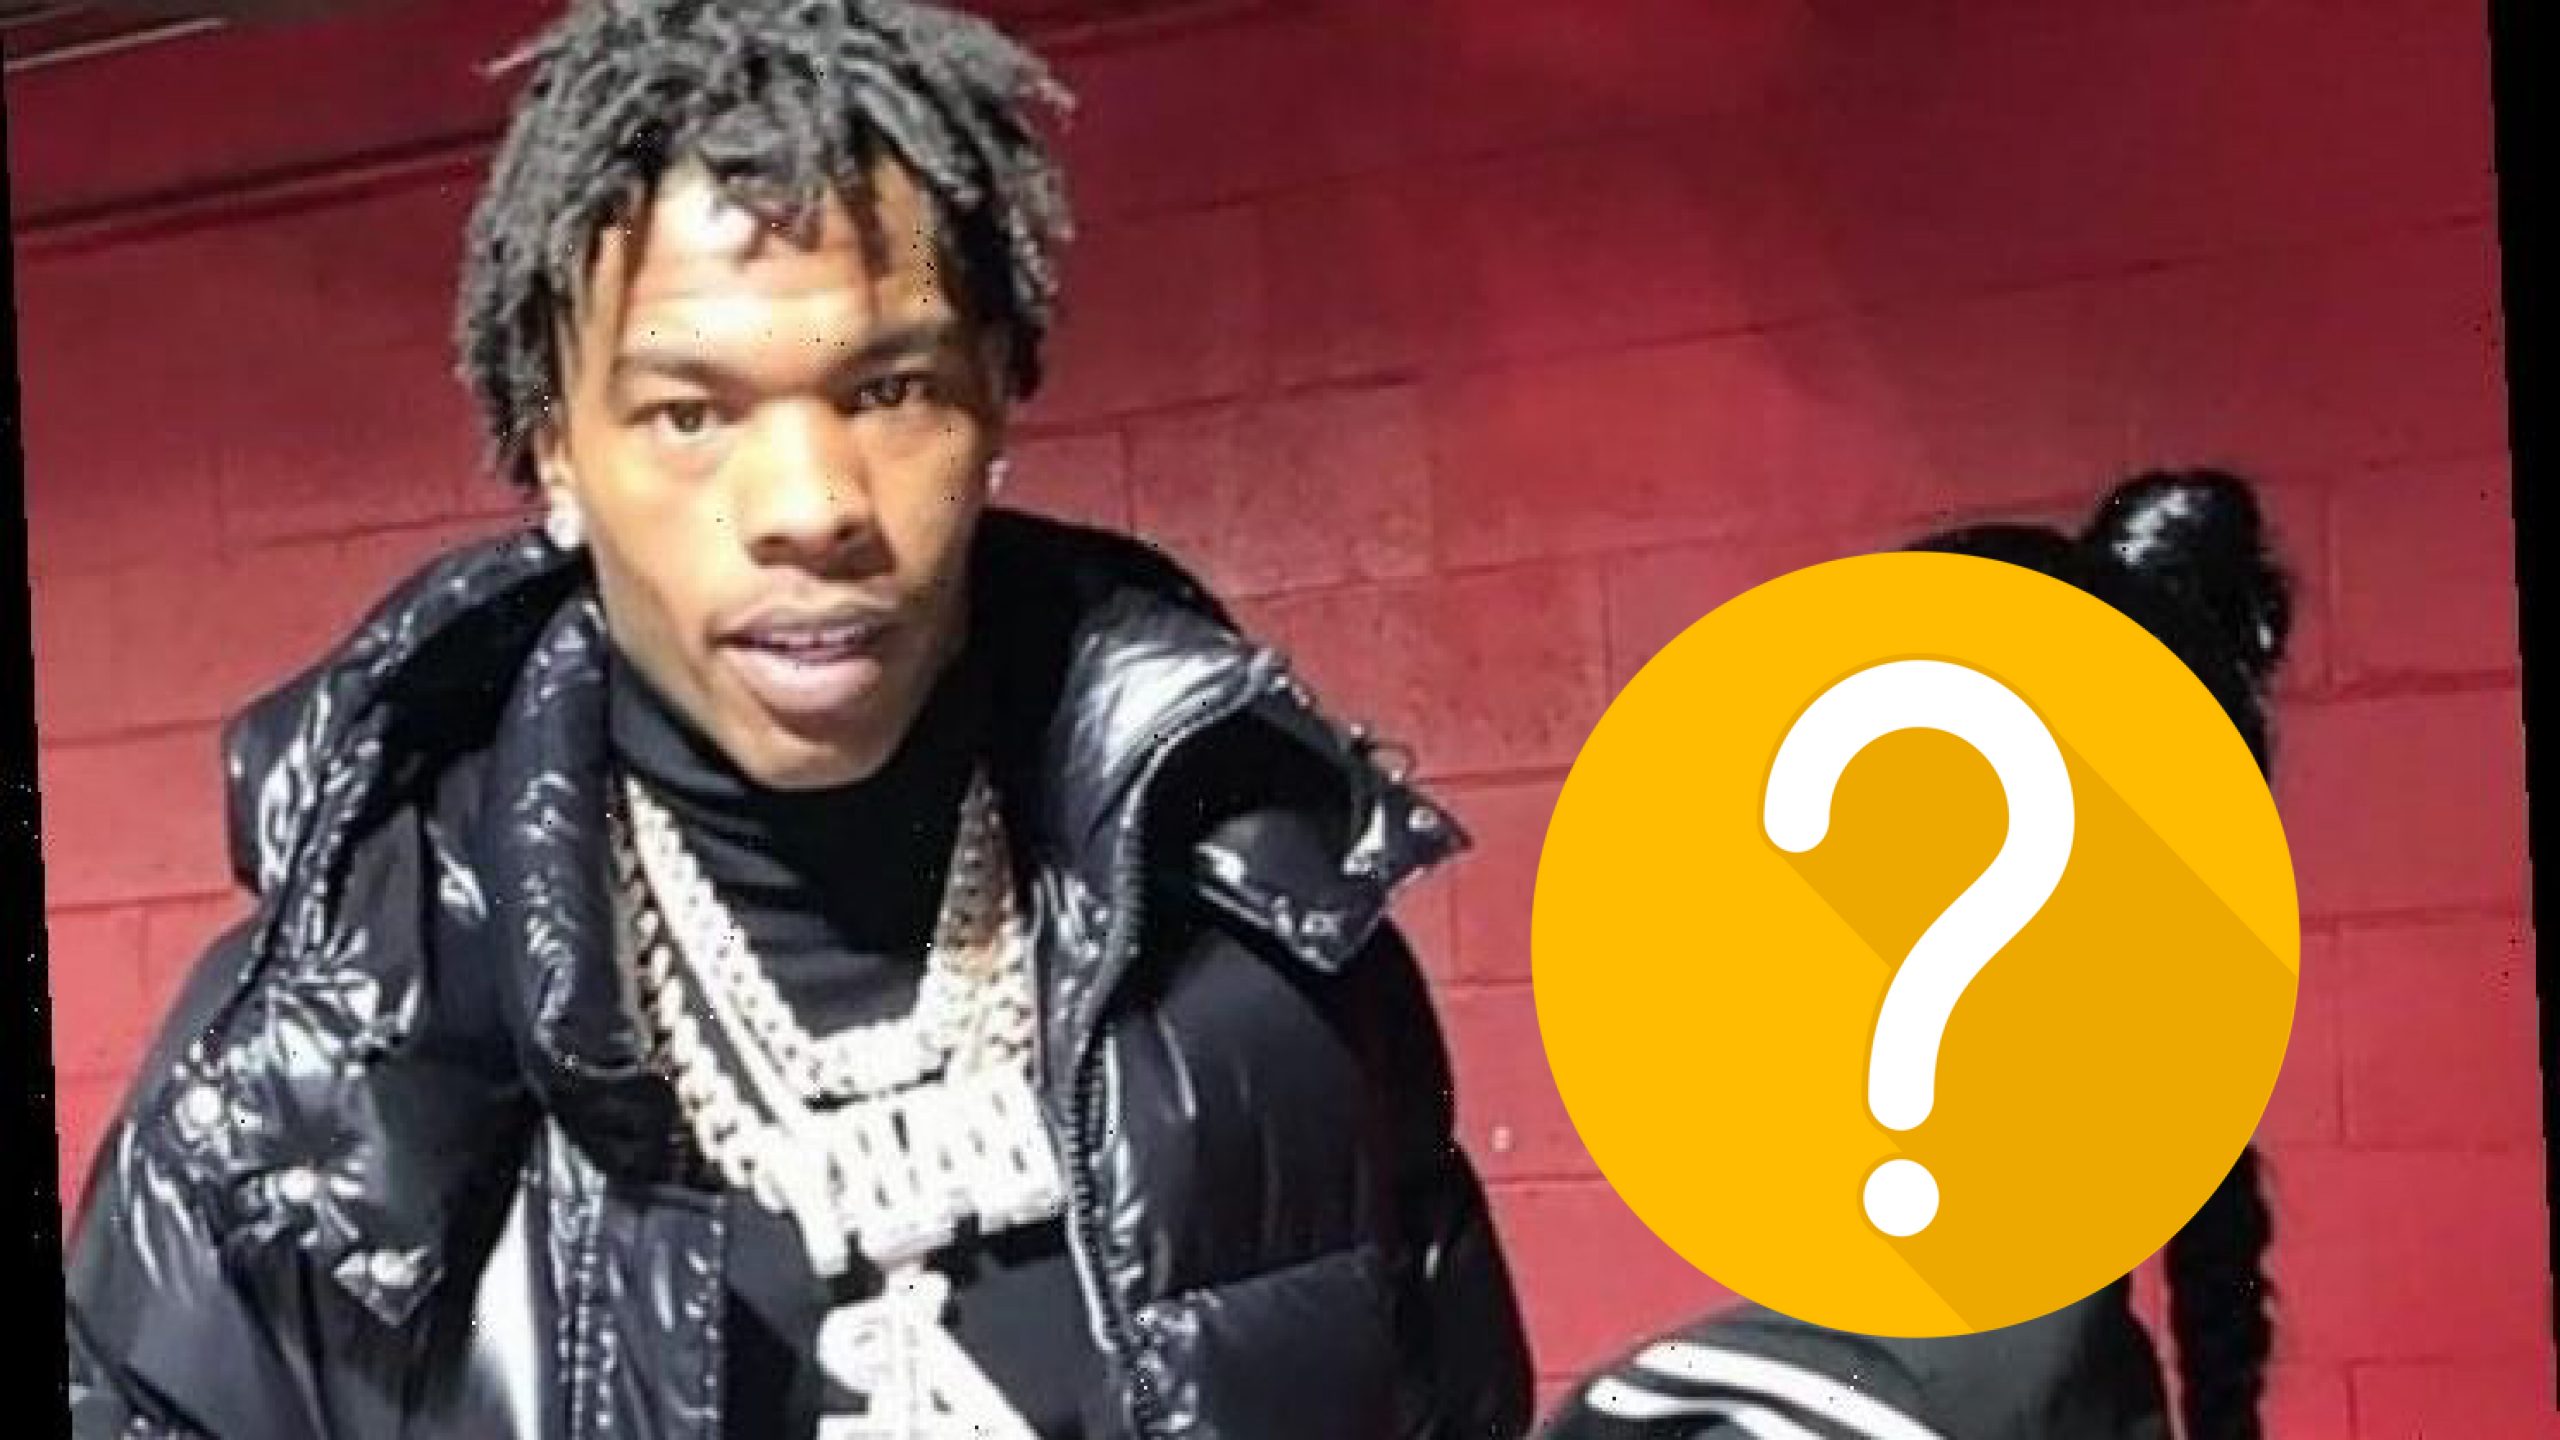 Lil Baby Seeking To Remix “Onto Me” With A Female Artist